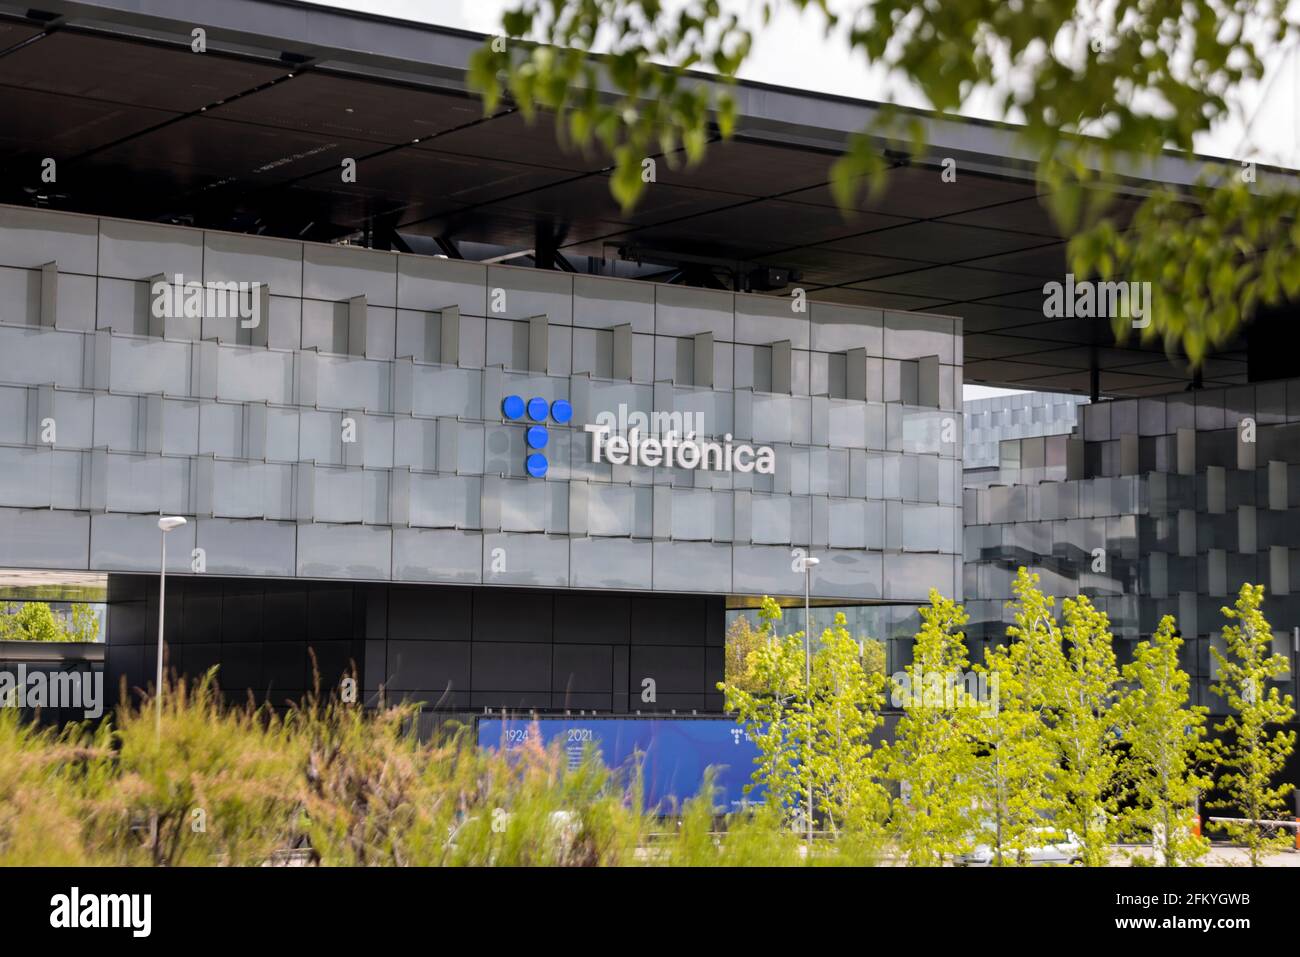 Telefónica's new logo, unveiled on April 23, 2021, is visible at the company's headquarters (Ciudad de la Comunicación) in Madrid, Spain. Stock Photo